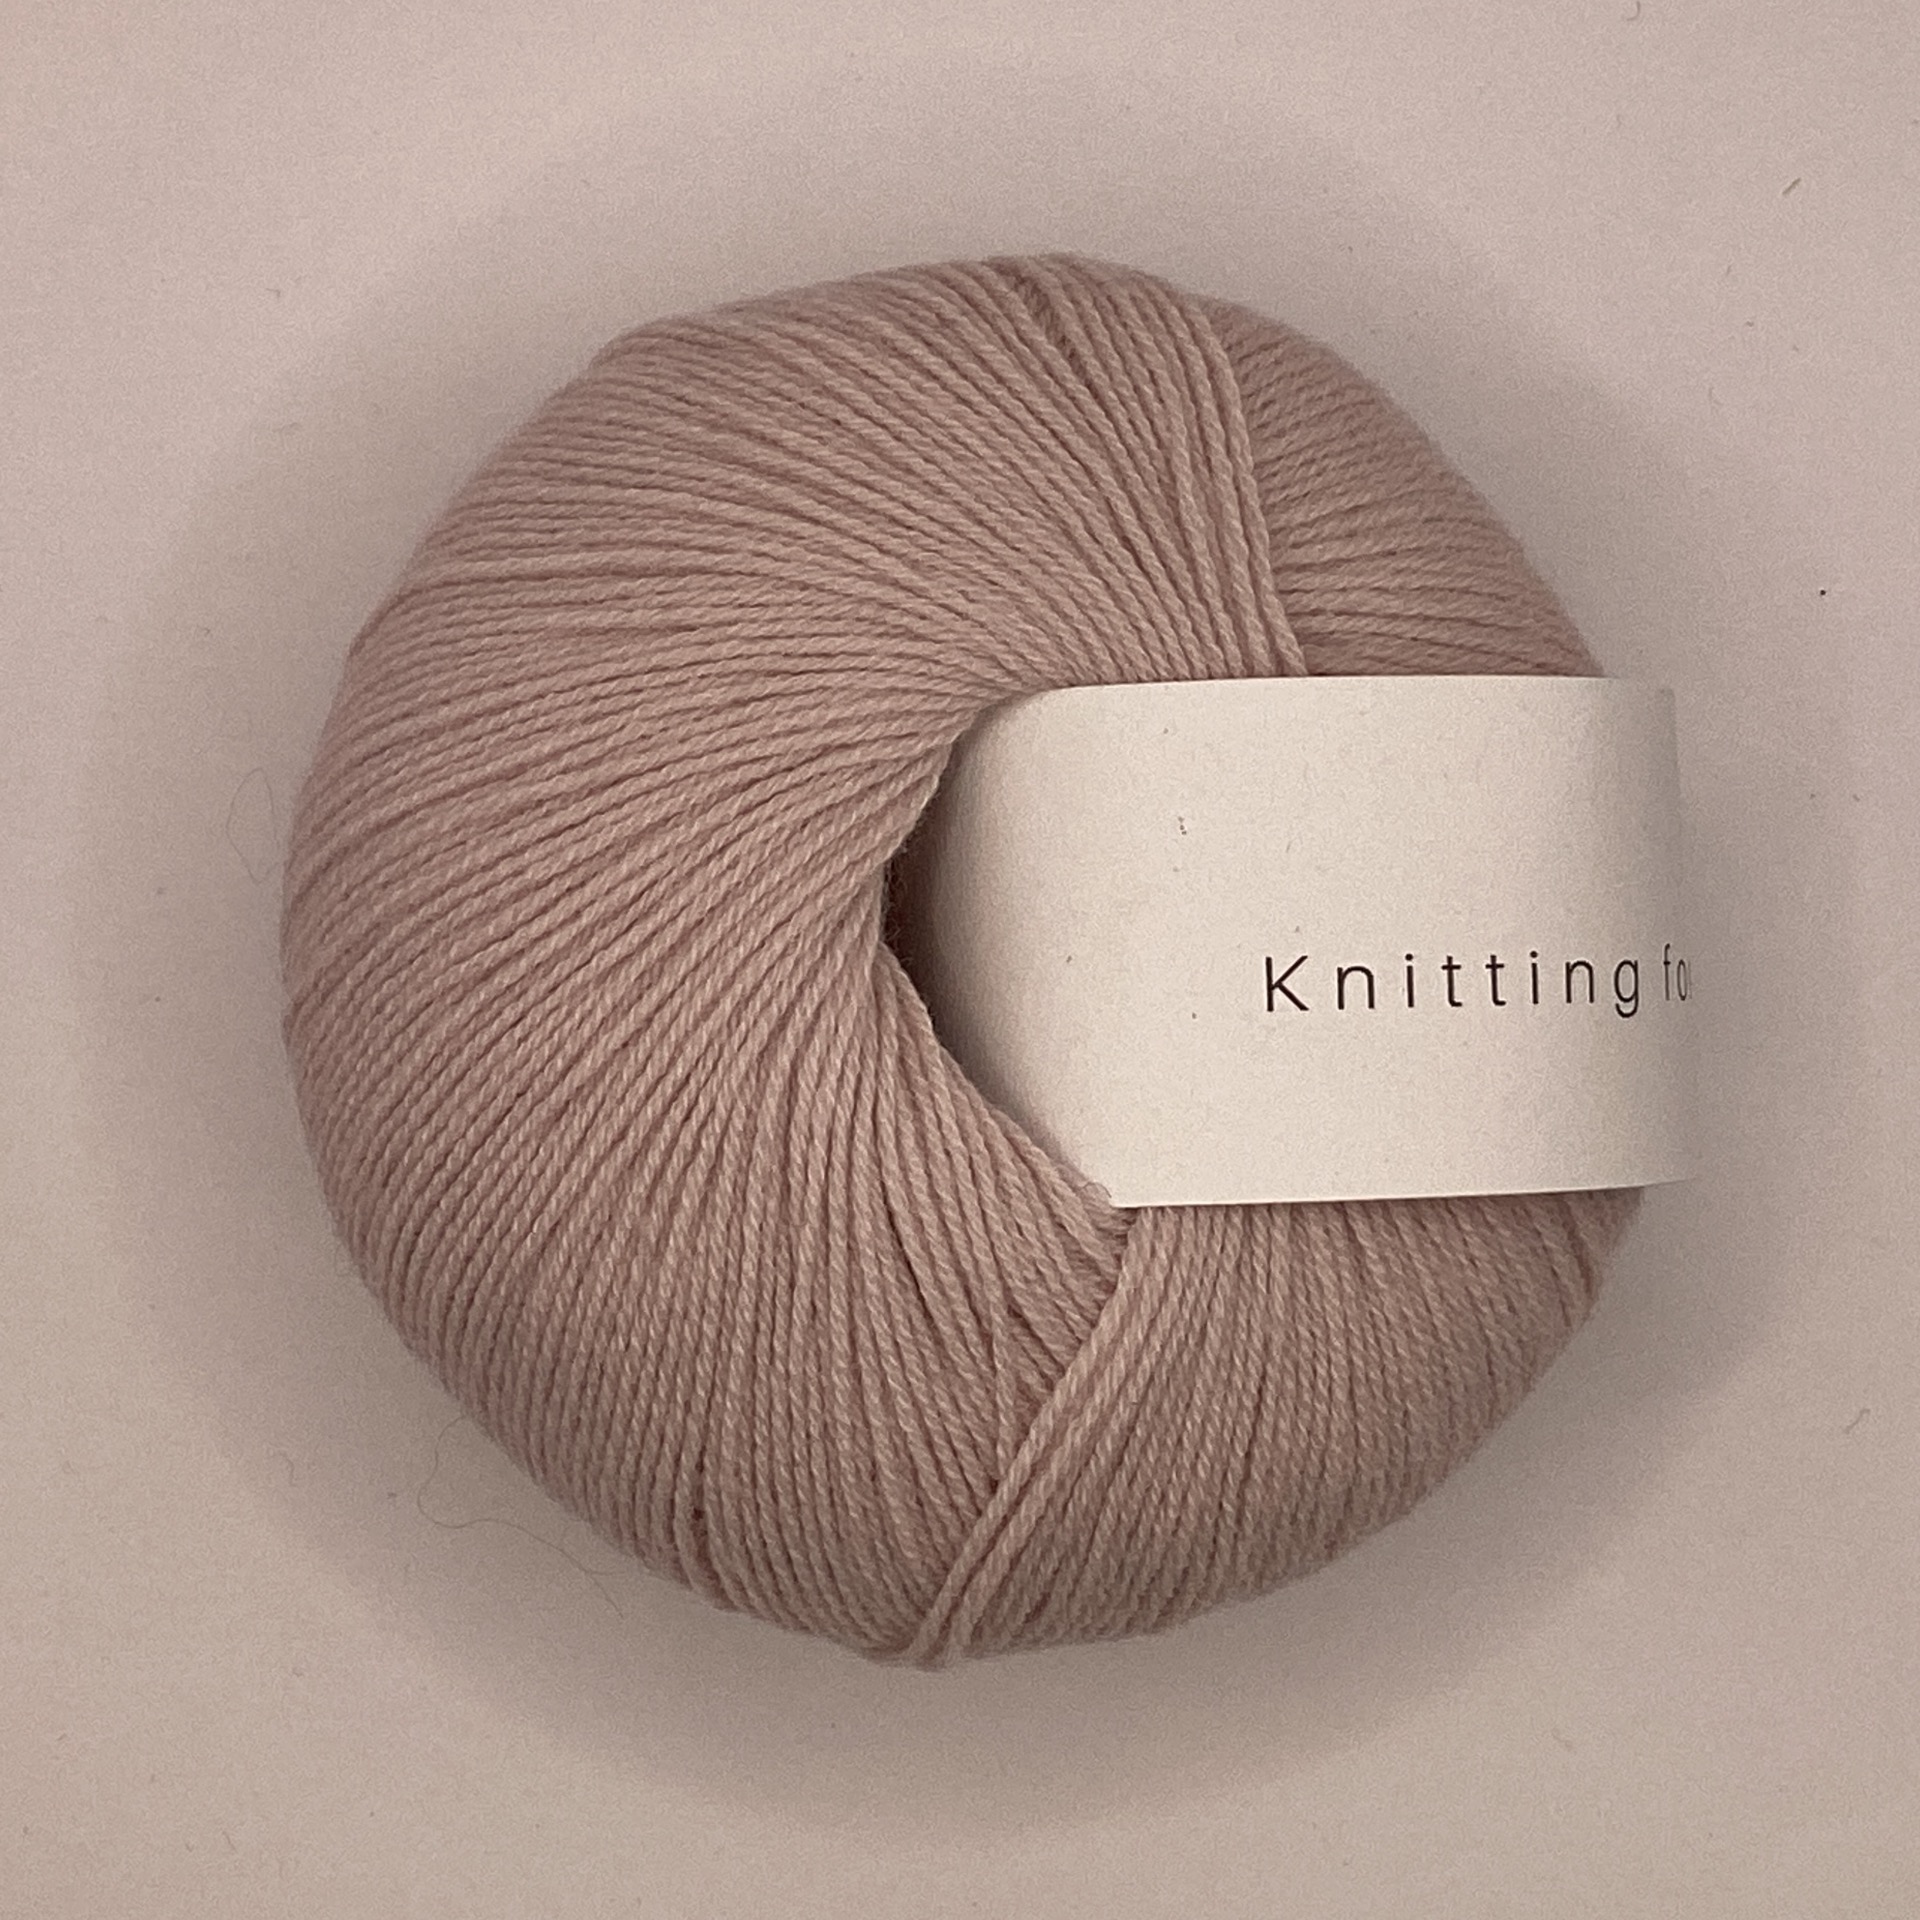 Knitting for Olive Cotton Merino Slate - Knitcessities